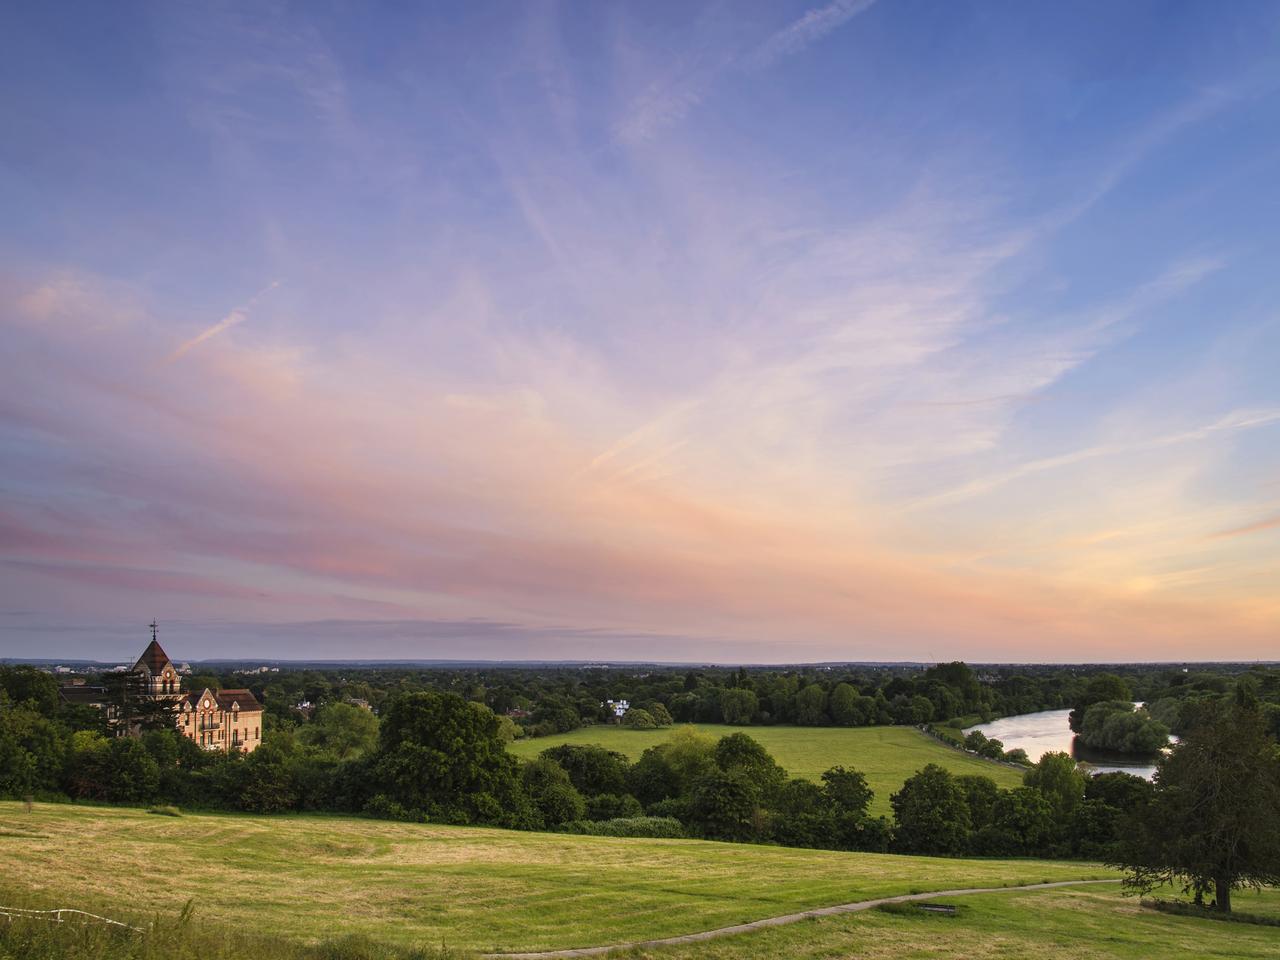 Colorful sunset landscape over fields and River Thames on Richmond Hill in London.